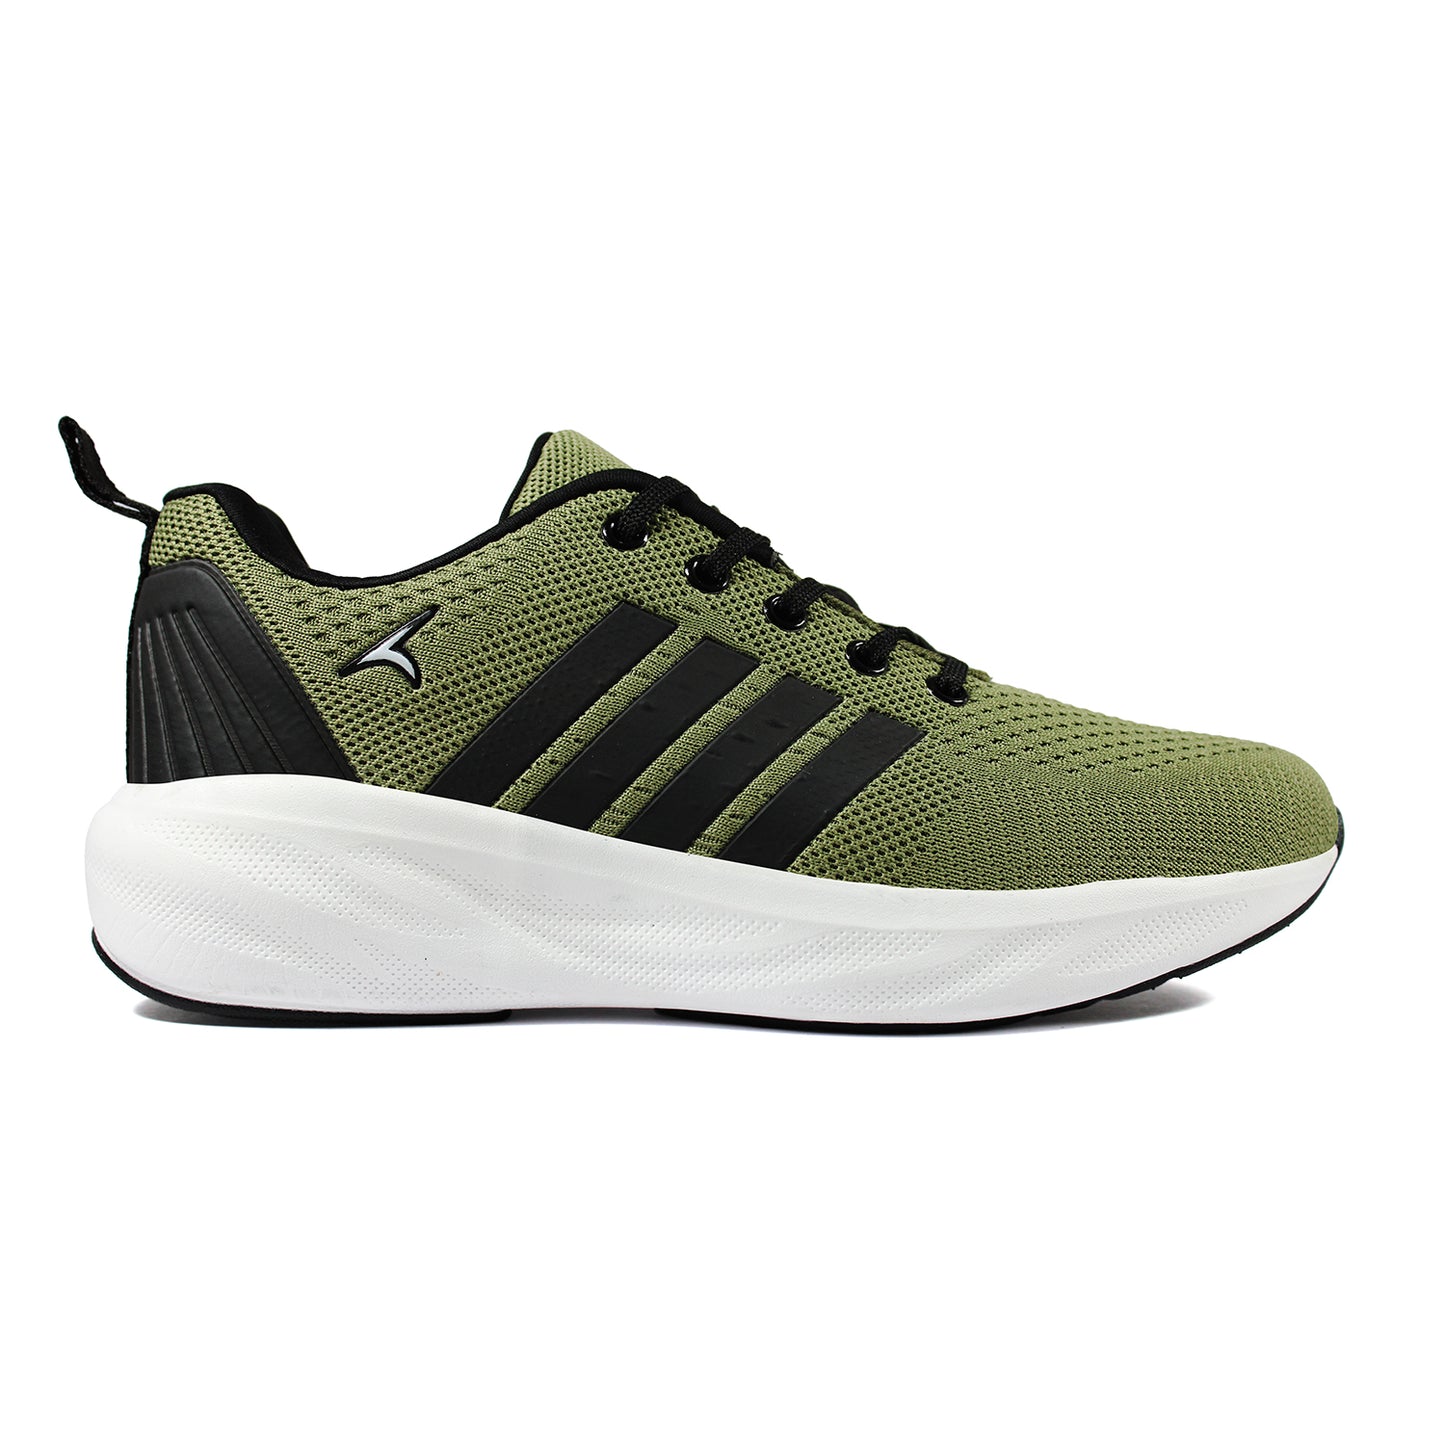 Tracer Shoes | Olive | Men's Collection